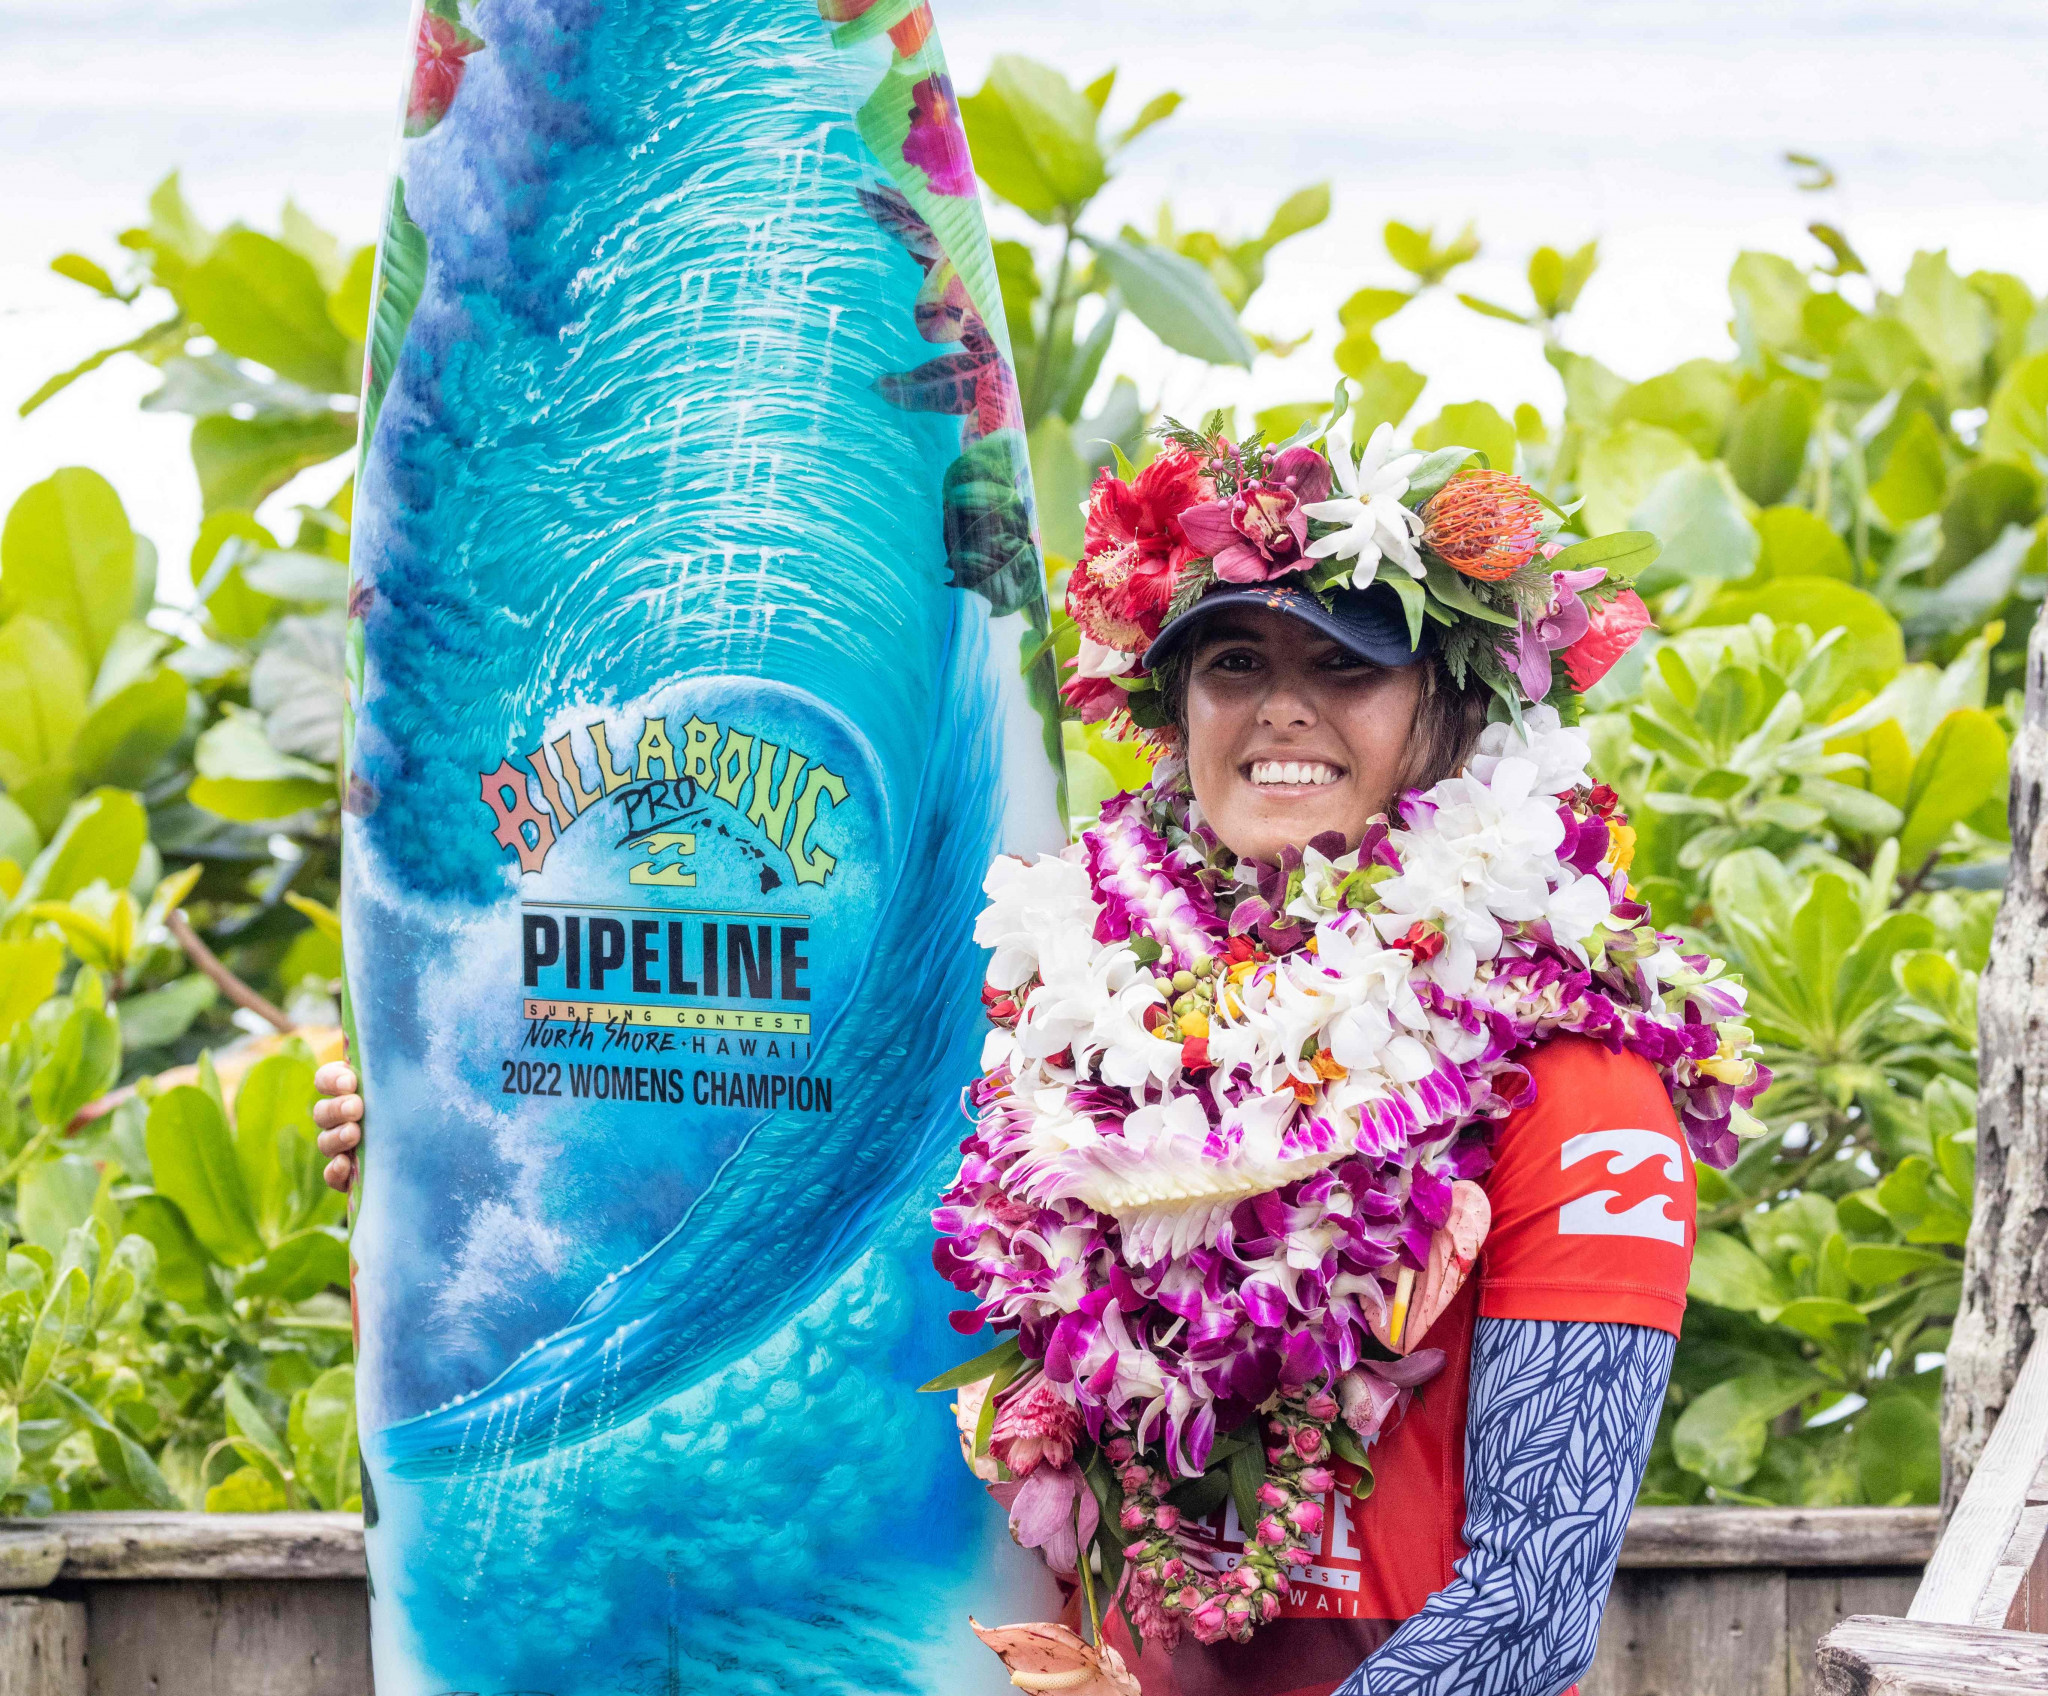 Moana Jones Wong, the winner of the previous round of the World Surf League Championship Tour, exited in the elimination round on this occasion ©Getty Images